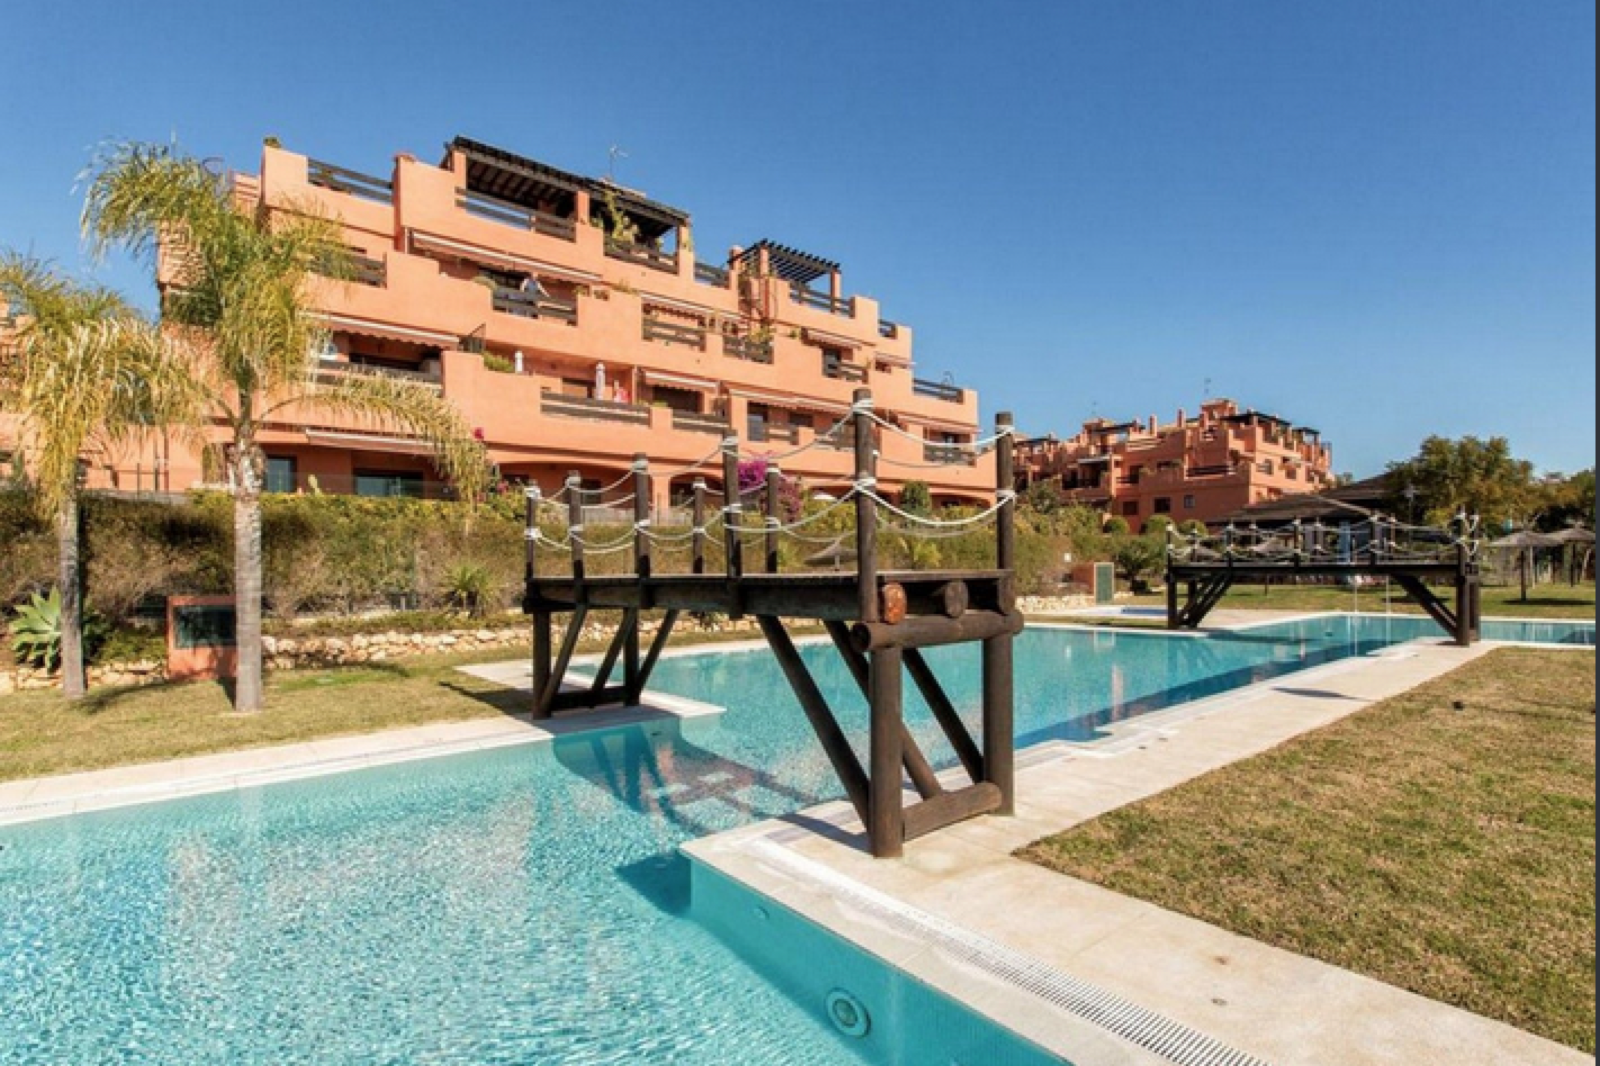 Fantastic apartment with large terrace in a private complex very close to the beach